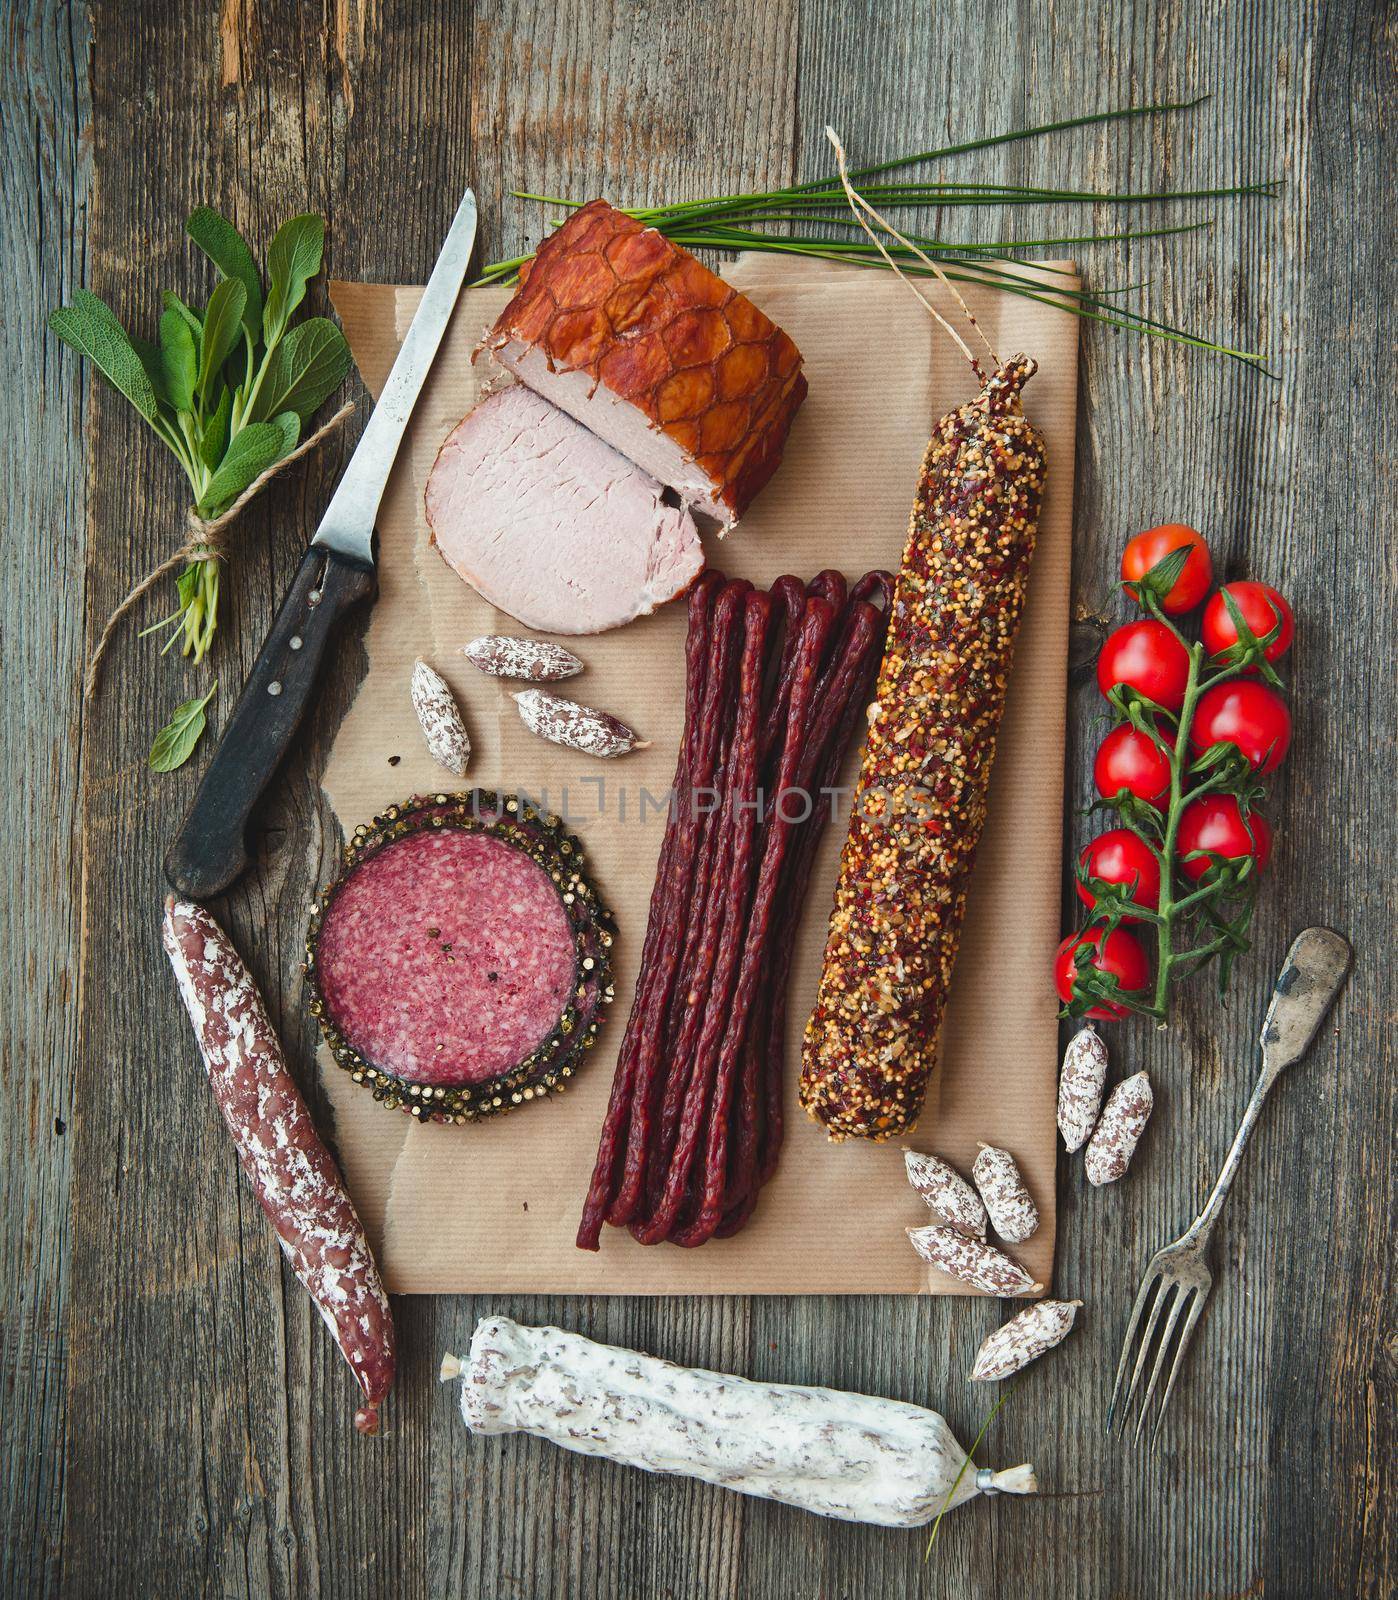 Assortment of cold meats over wooden background